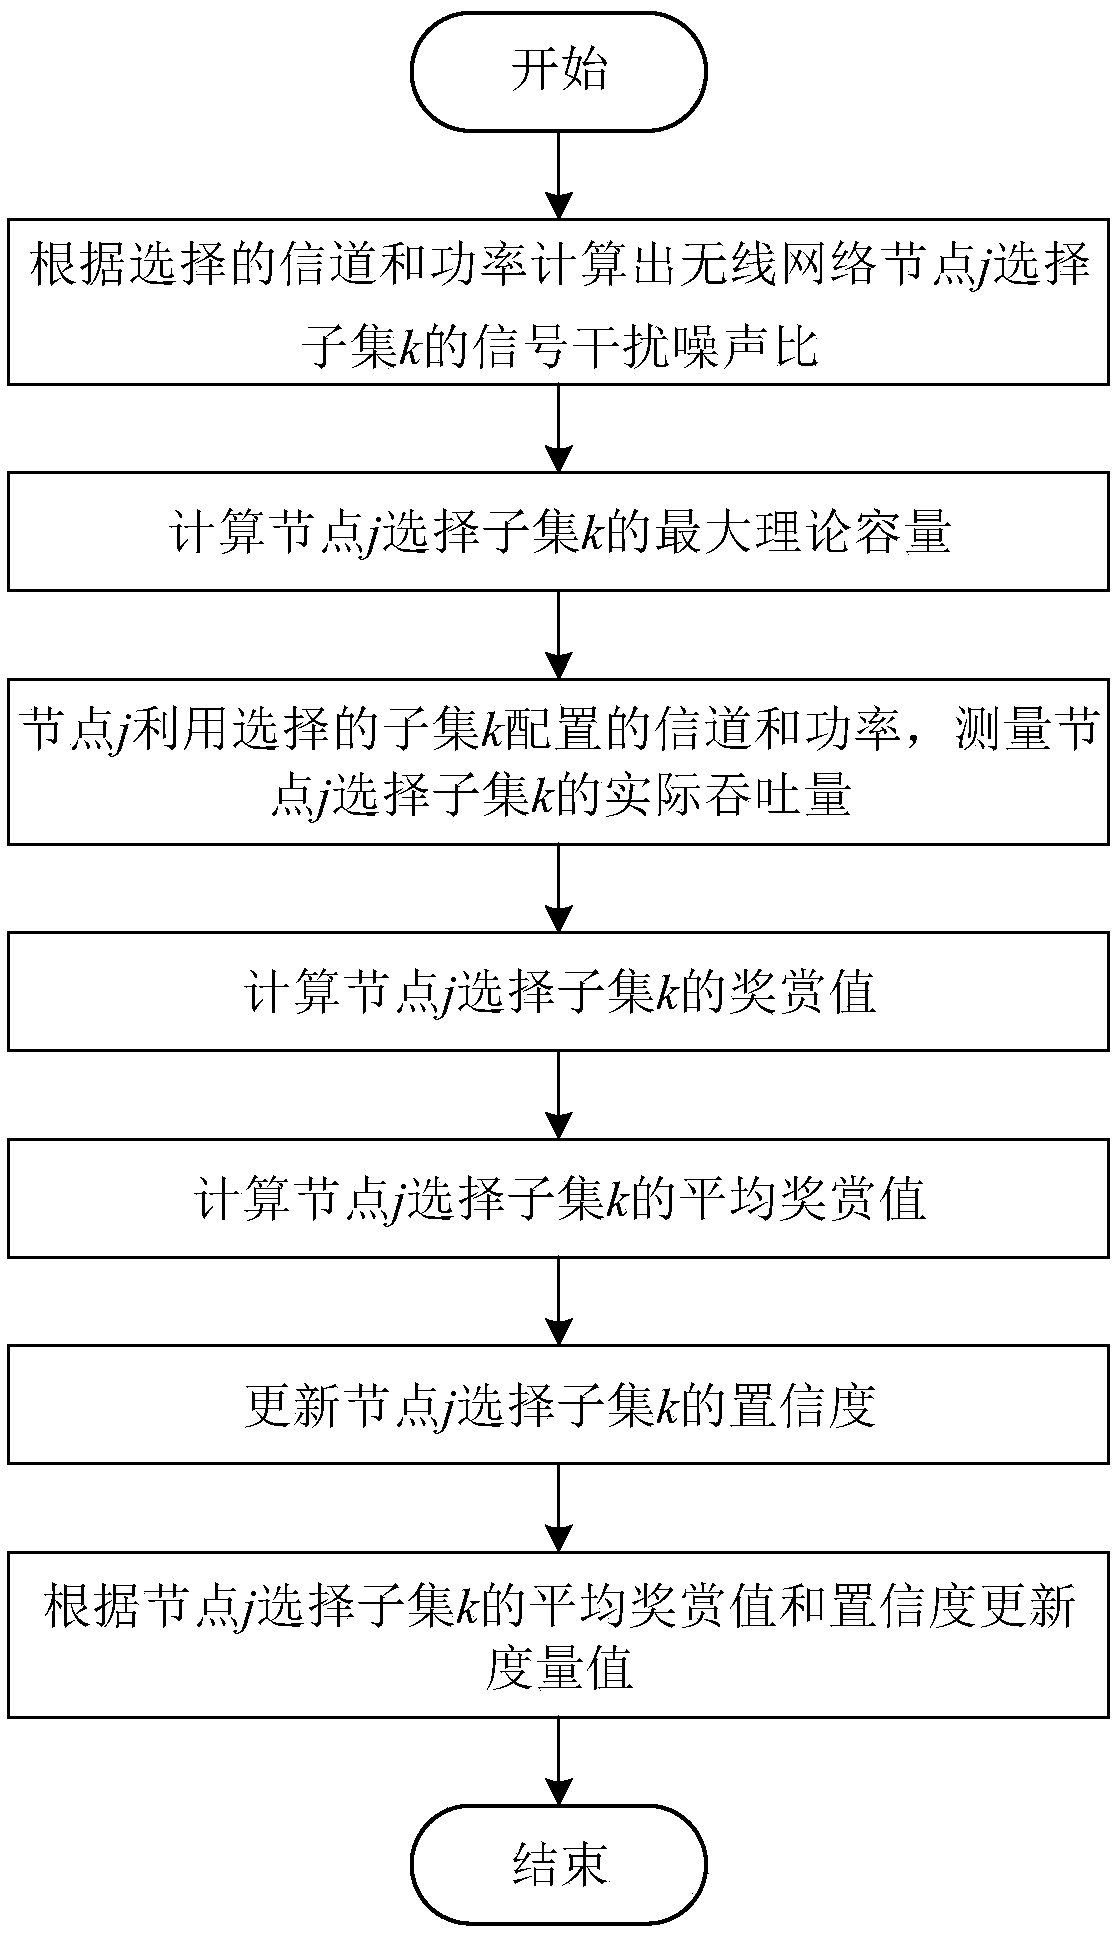 Cognition anti-interference communication method based on reinforcement learning algorithm